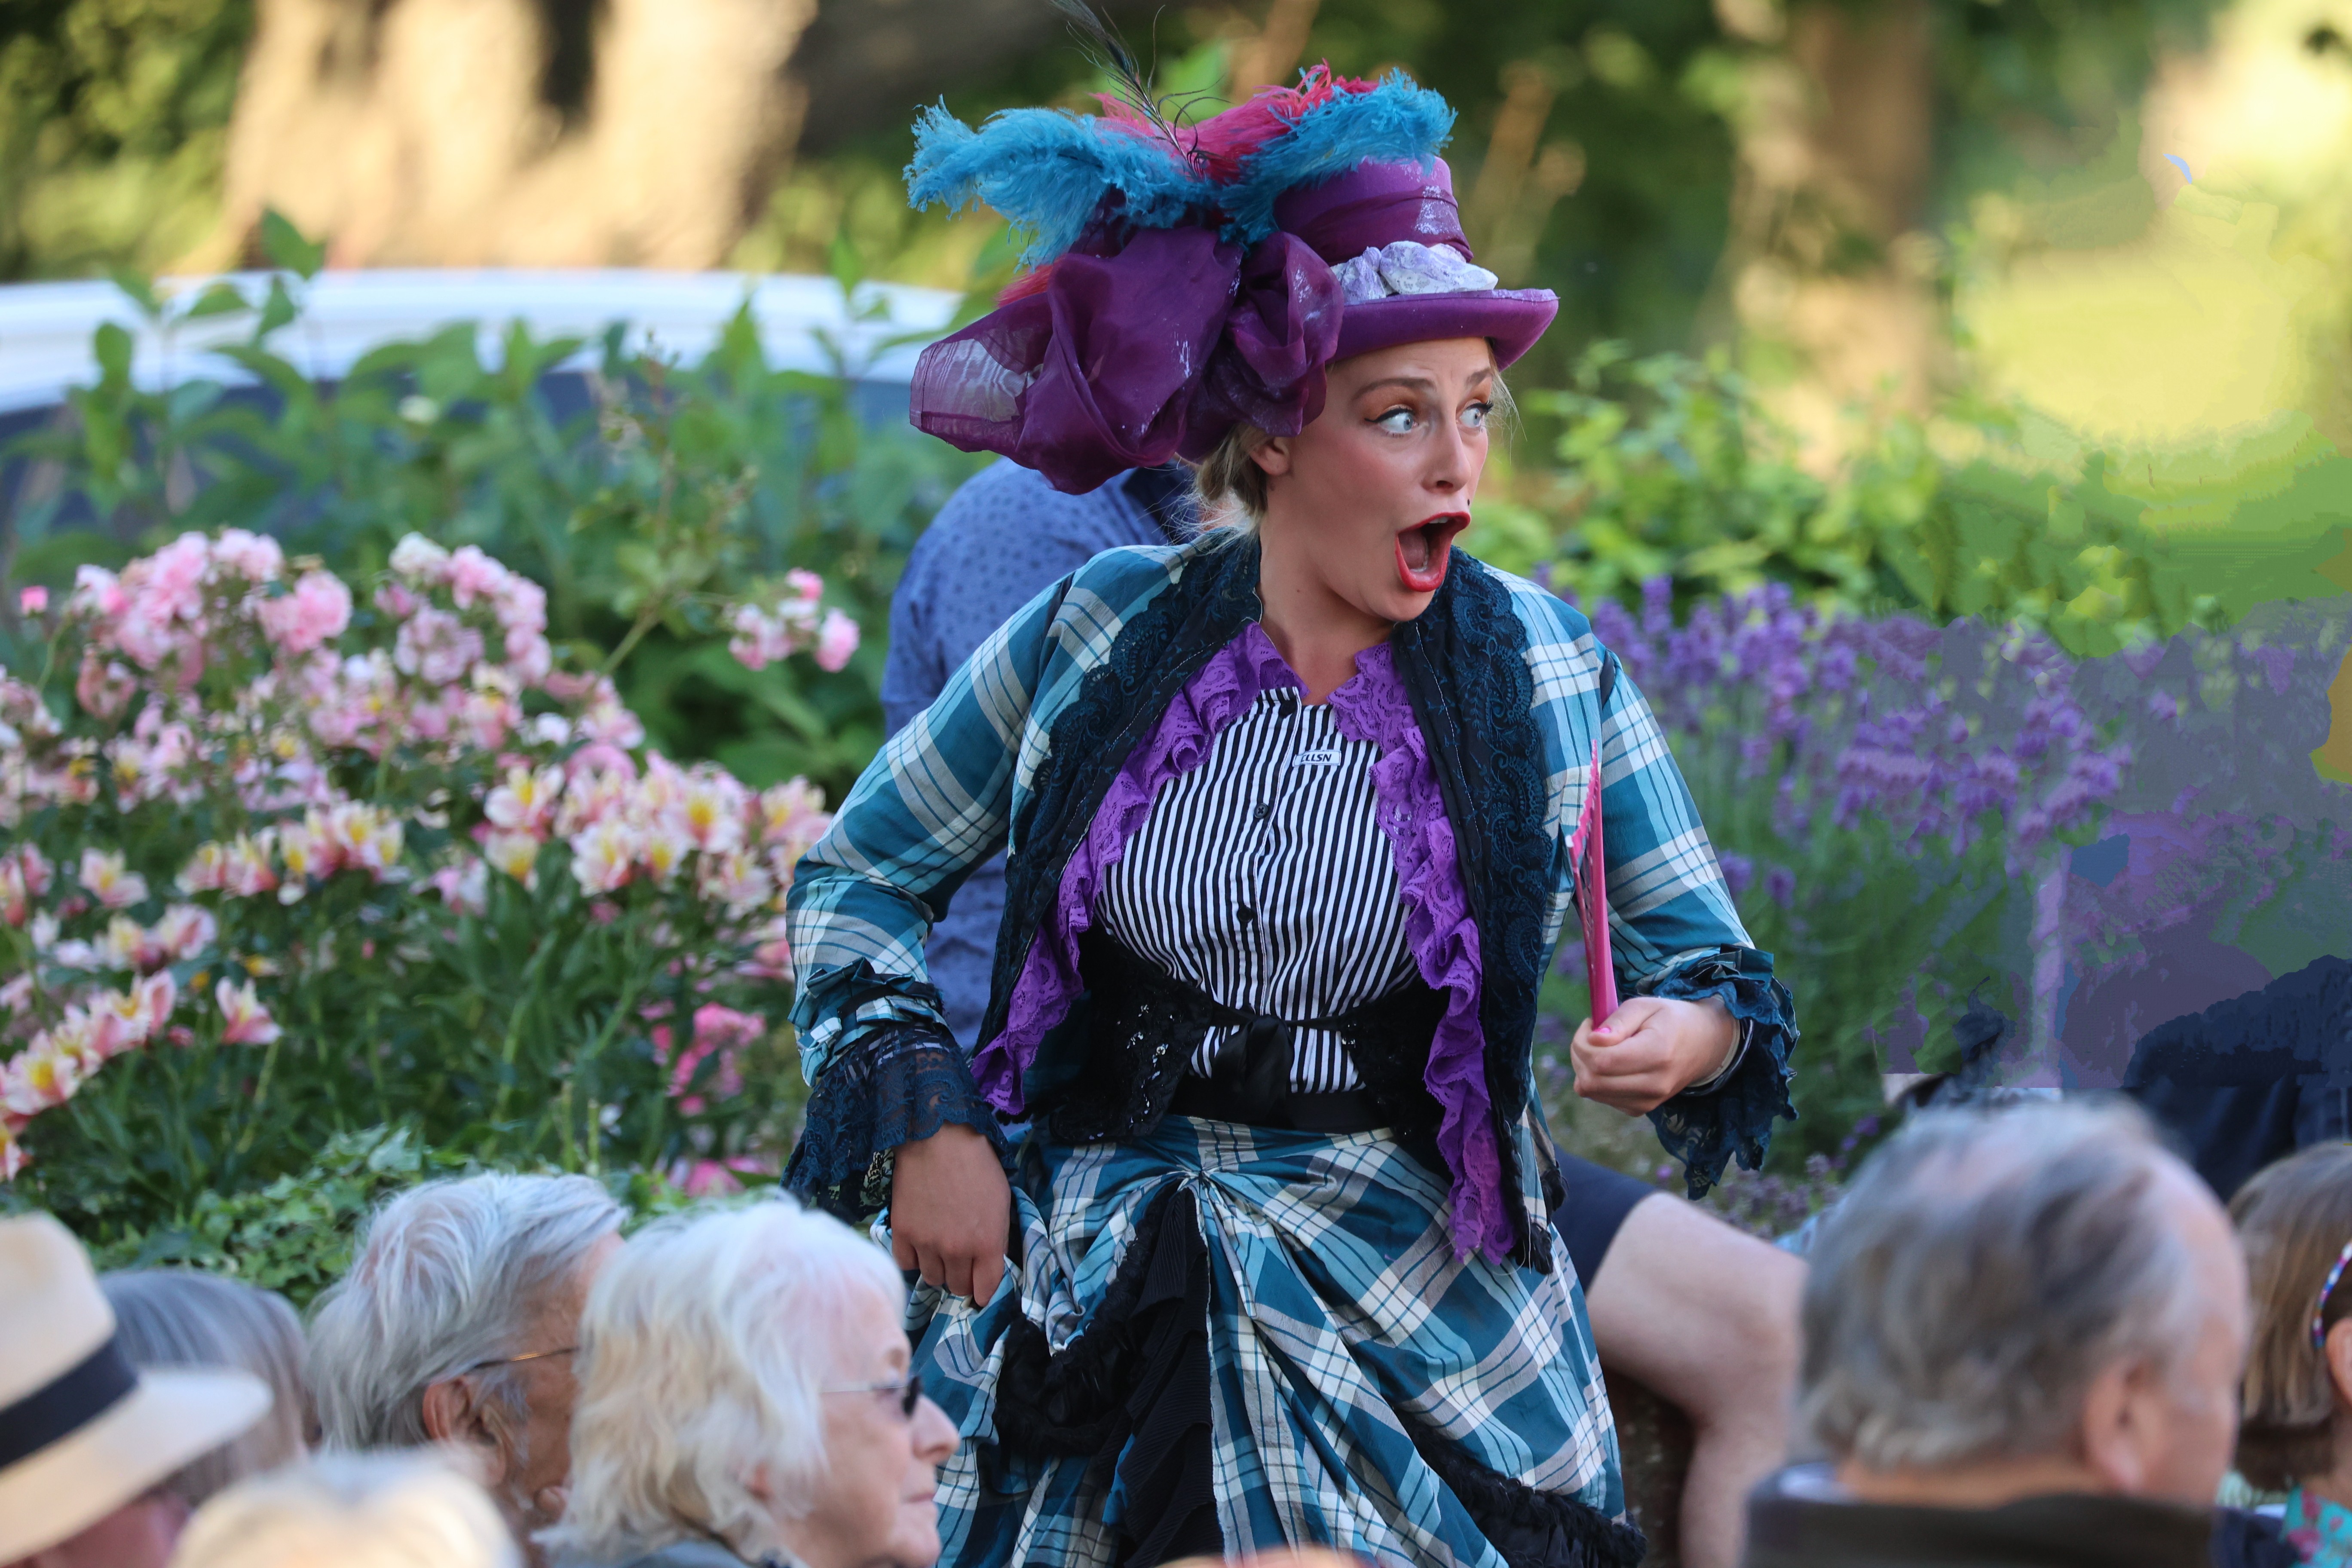 A person dressed in colorful, theatrical attire performs outdoors. They wear a vibrant purple hat adorned with feathers and an elaborate, plaid costume. Their facial expression conveys surprise or excitement. An audience watches among flowers and greenery in the background.